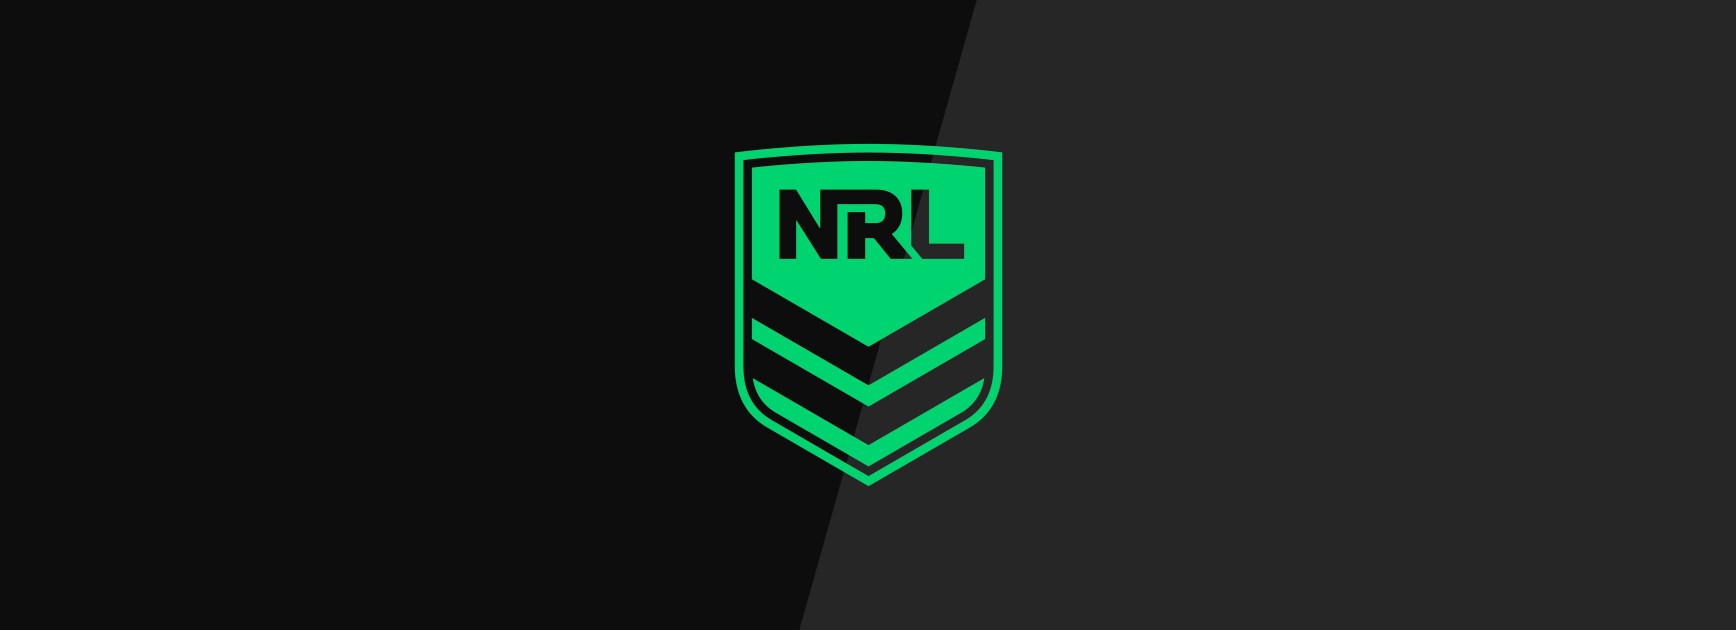 NRL Agrees Recovery Plan With Clubs